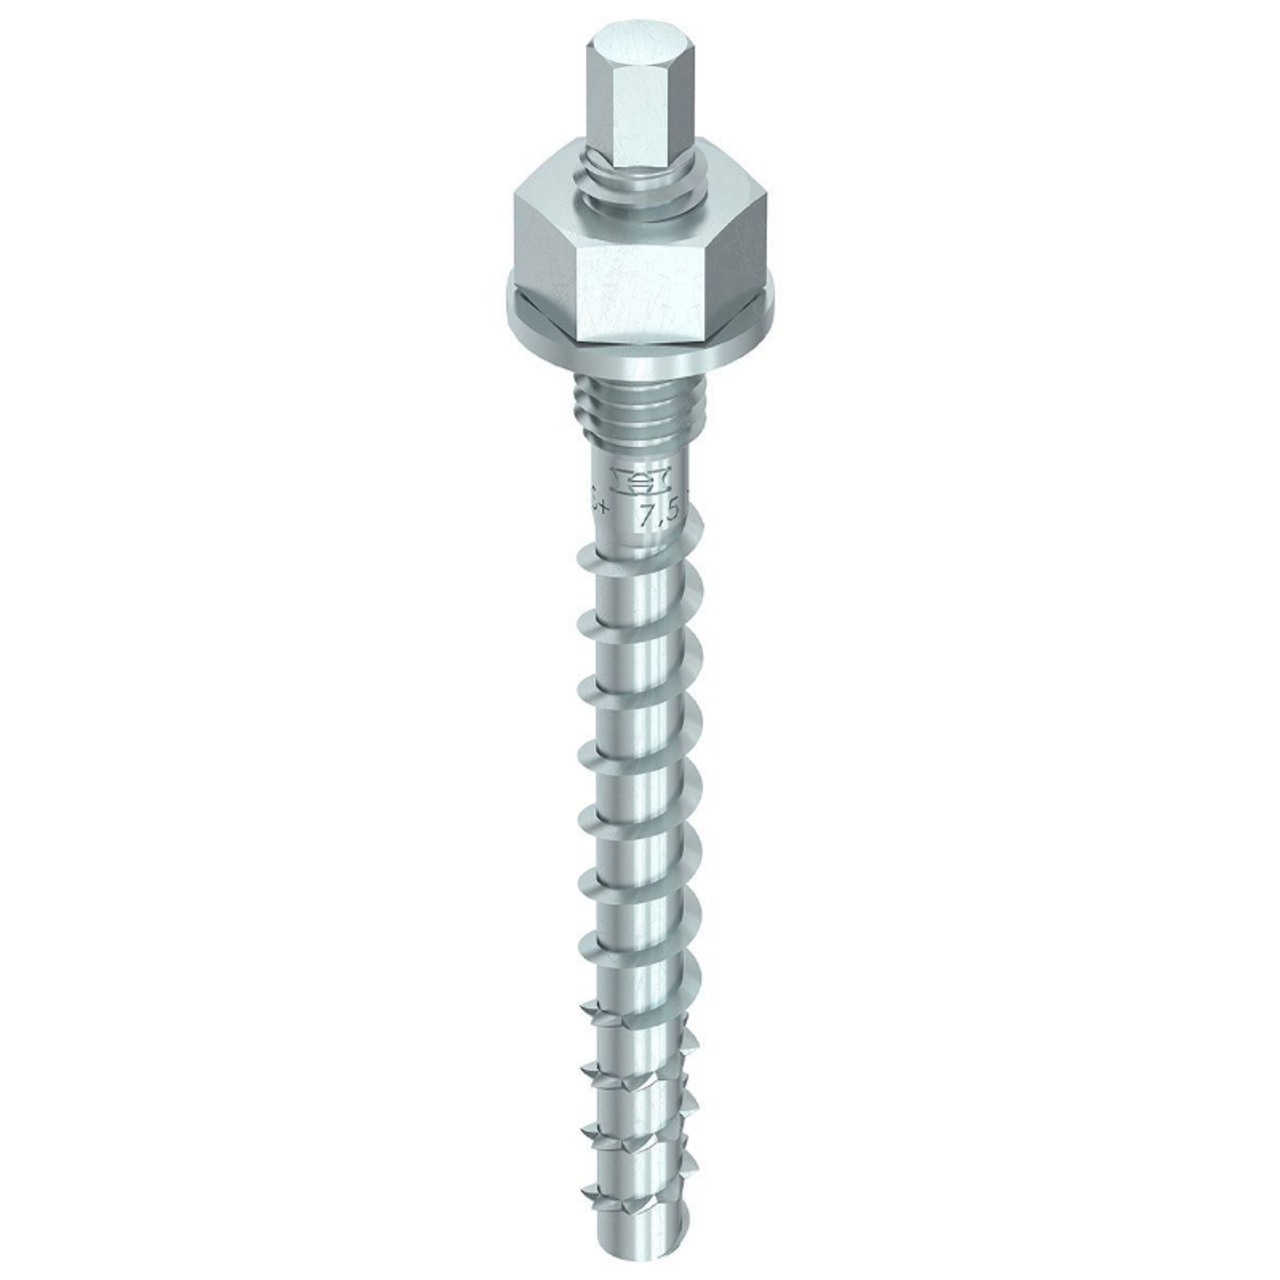 Buy Online HECO 12mm Pre-Set Threaded Screw Anchor with Silver Zinc for the Construction Industry and Installers in Perth, Sydney and Brisbane